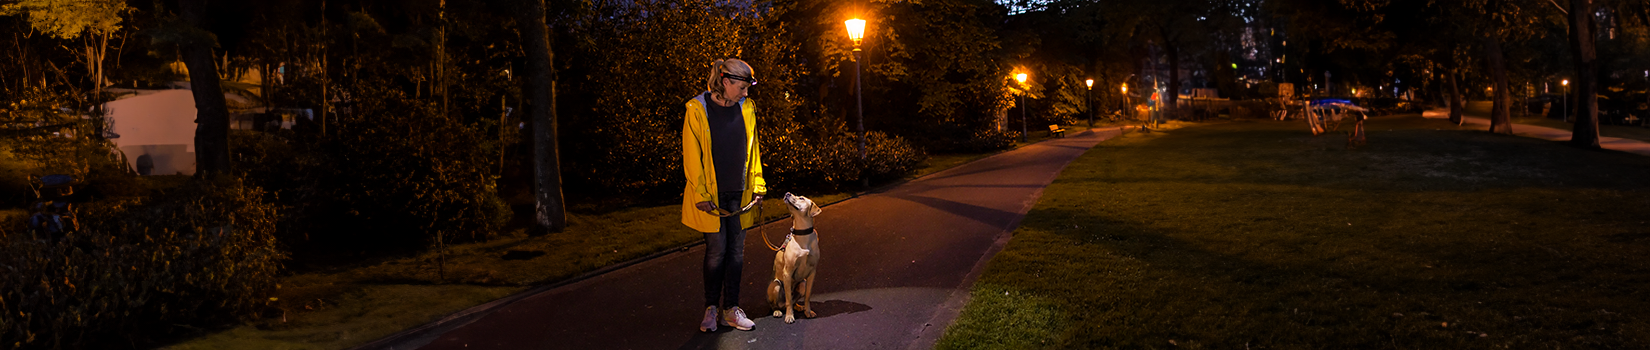 A woman with a headlamp takes her dog for a walk in the dark